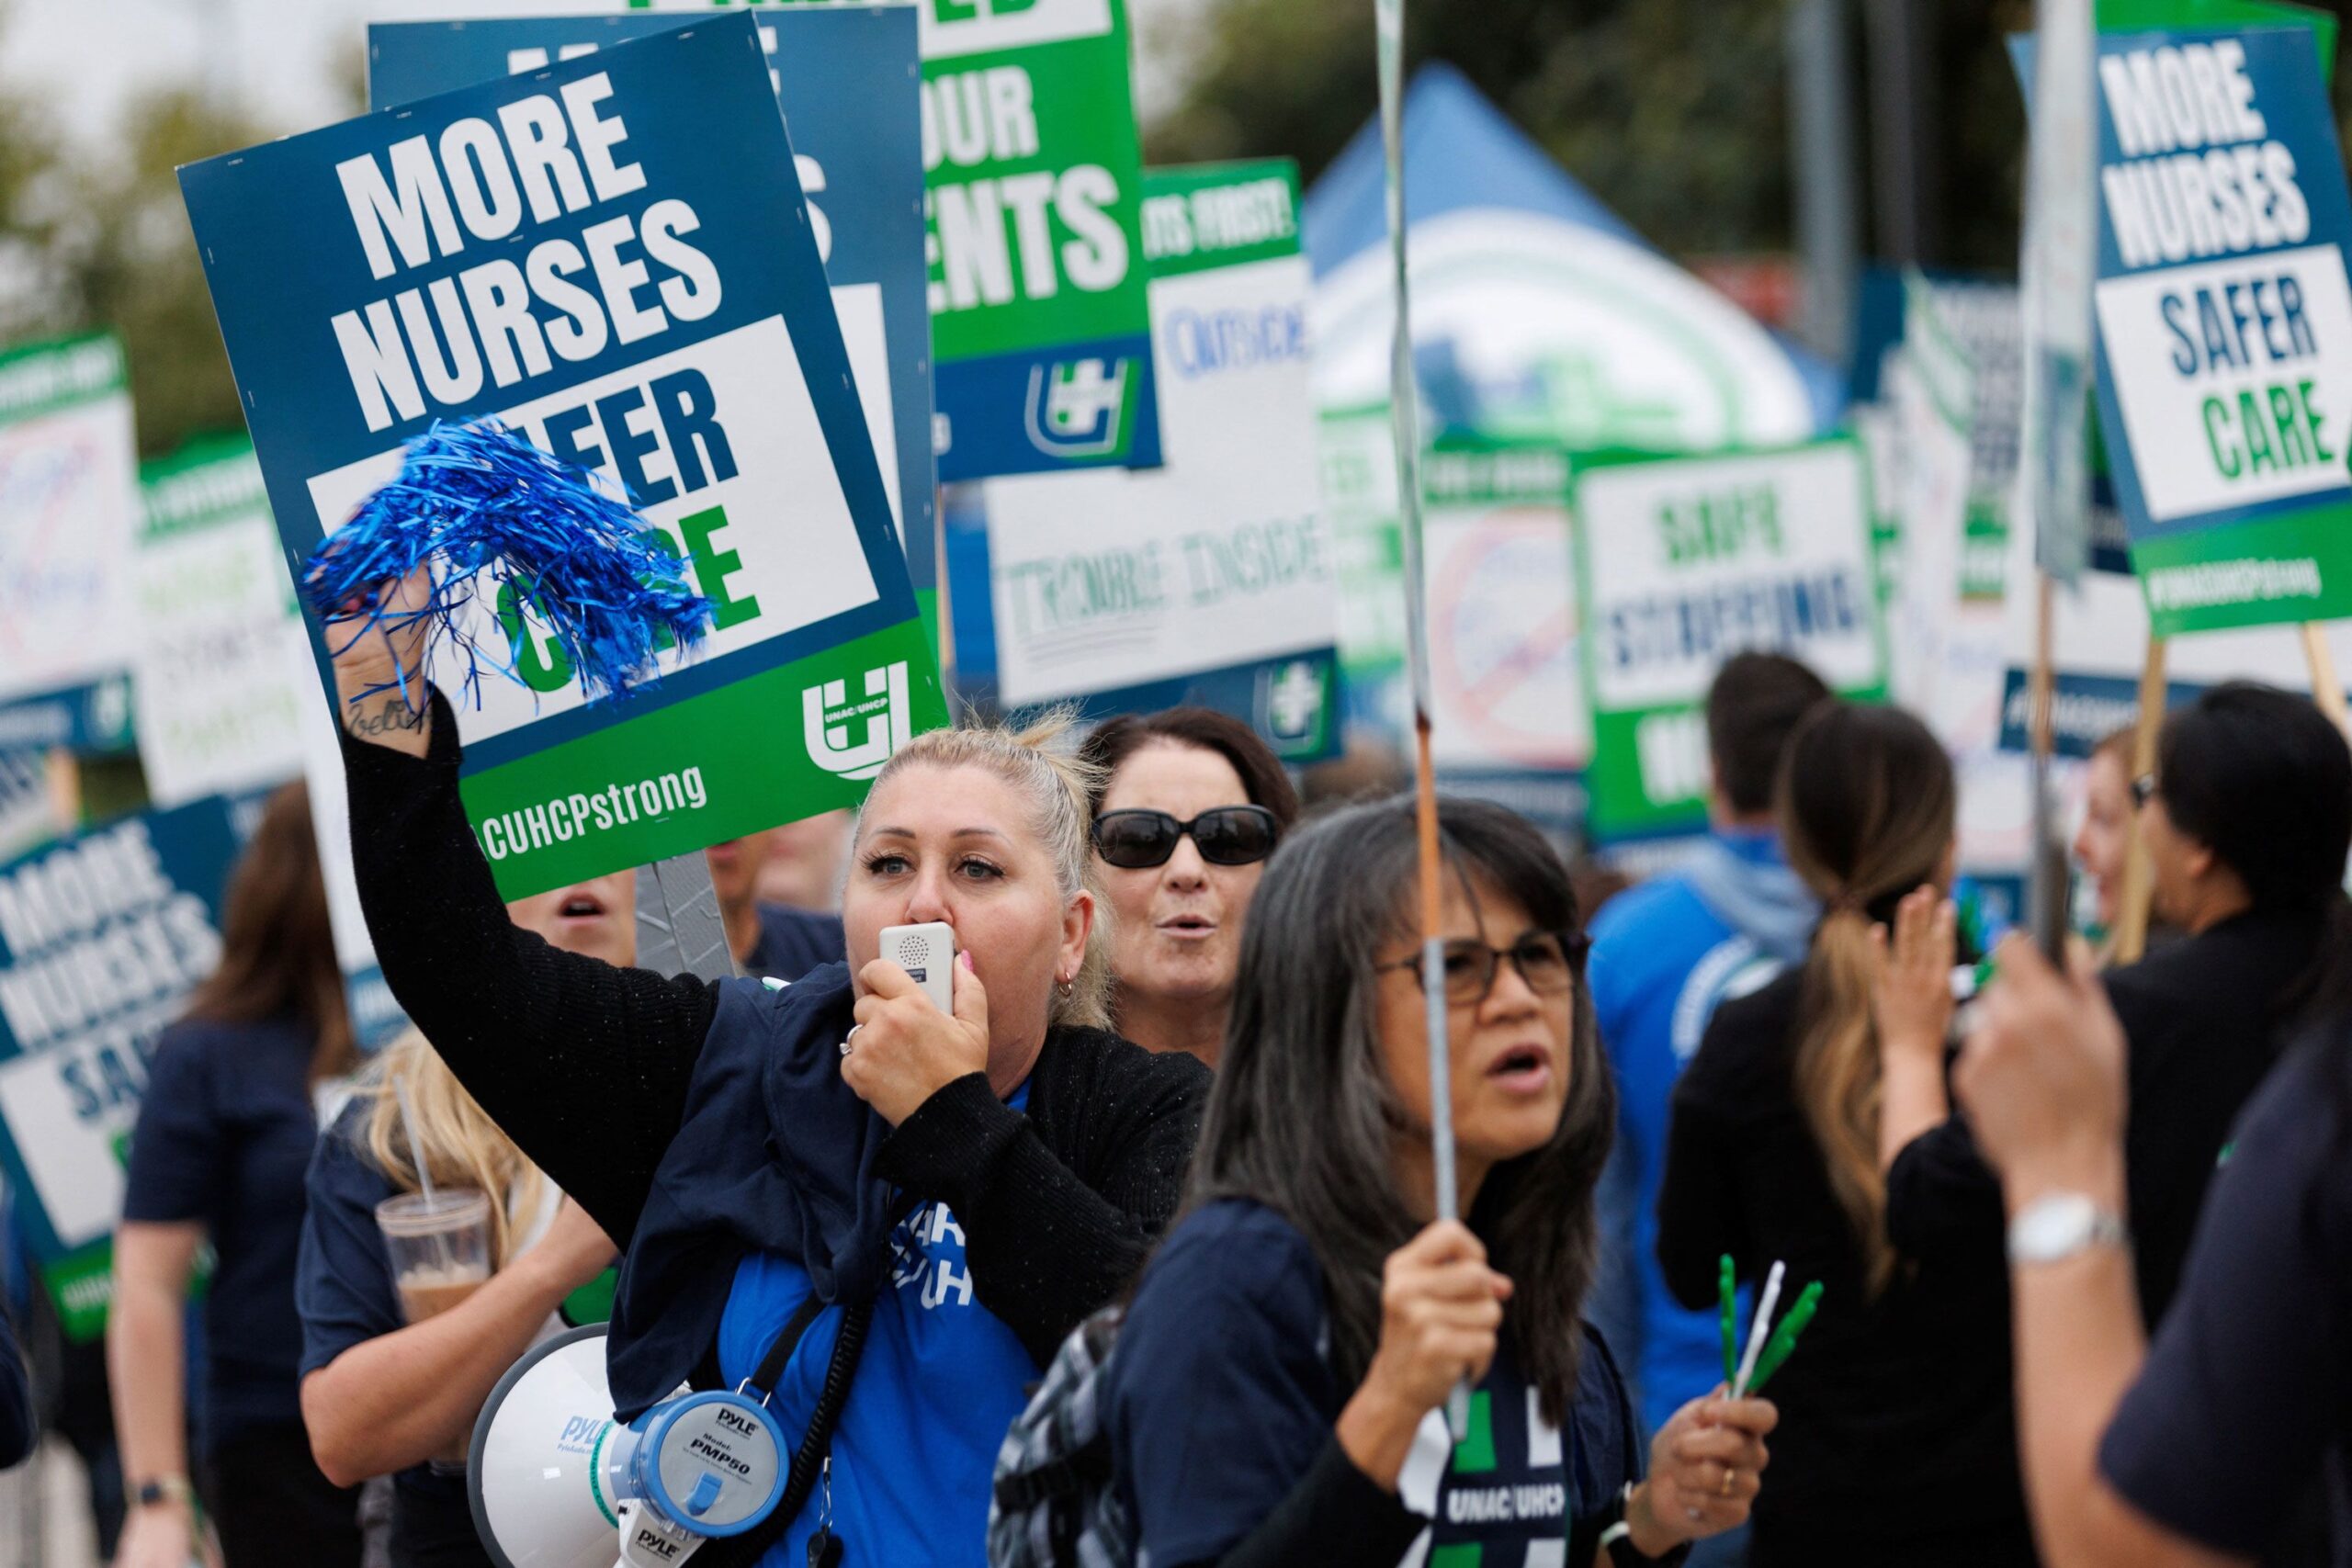 Kaiser workers reached a tentative deal with the company to end a labor dispute.
(Credit: Mike Blak...